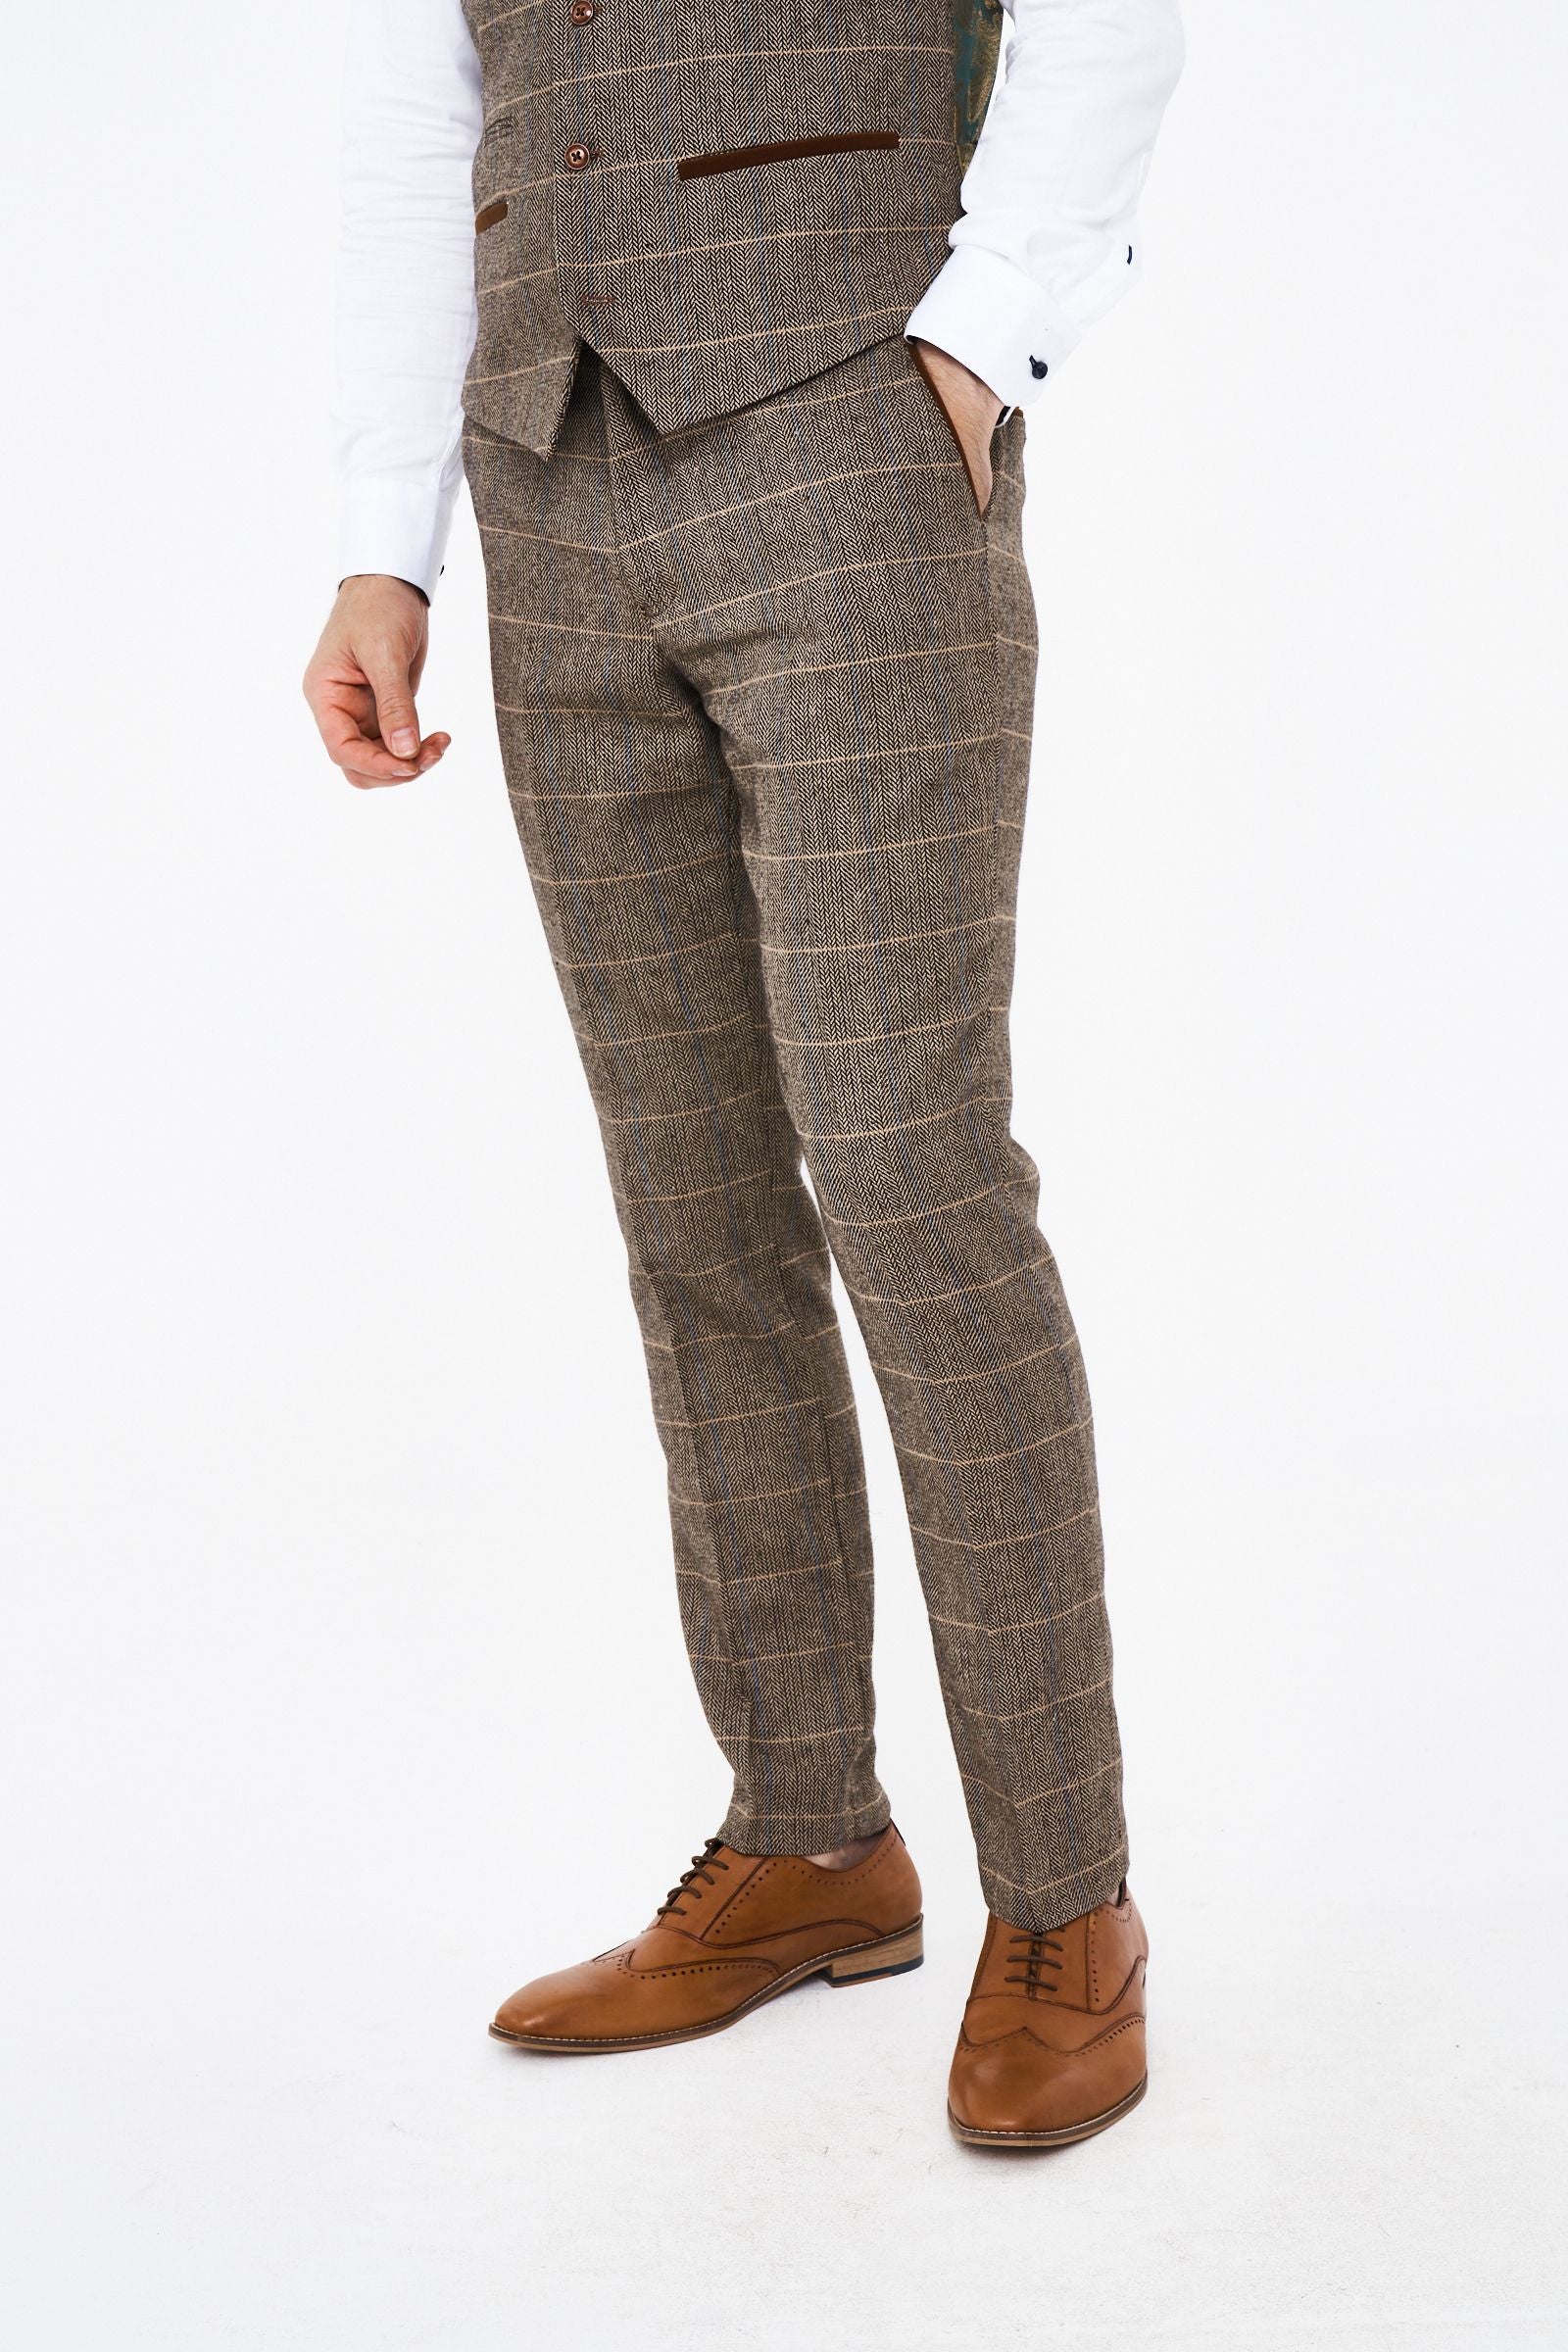 Marc Darcy Dx7 Tweed Trousers